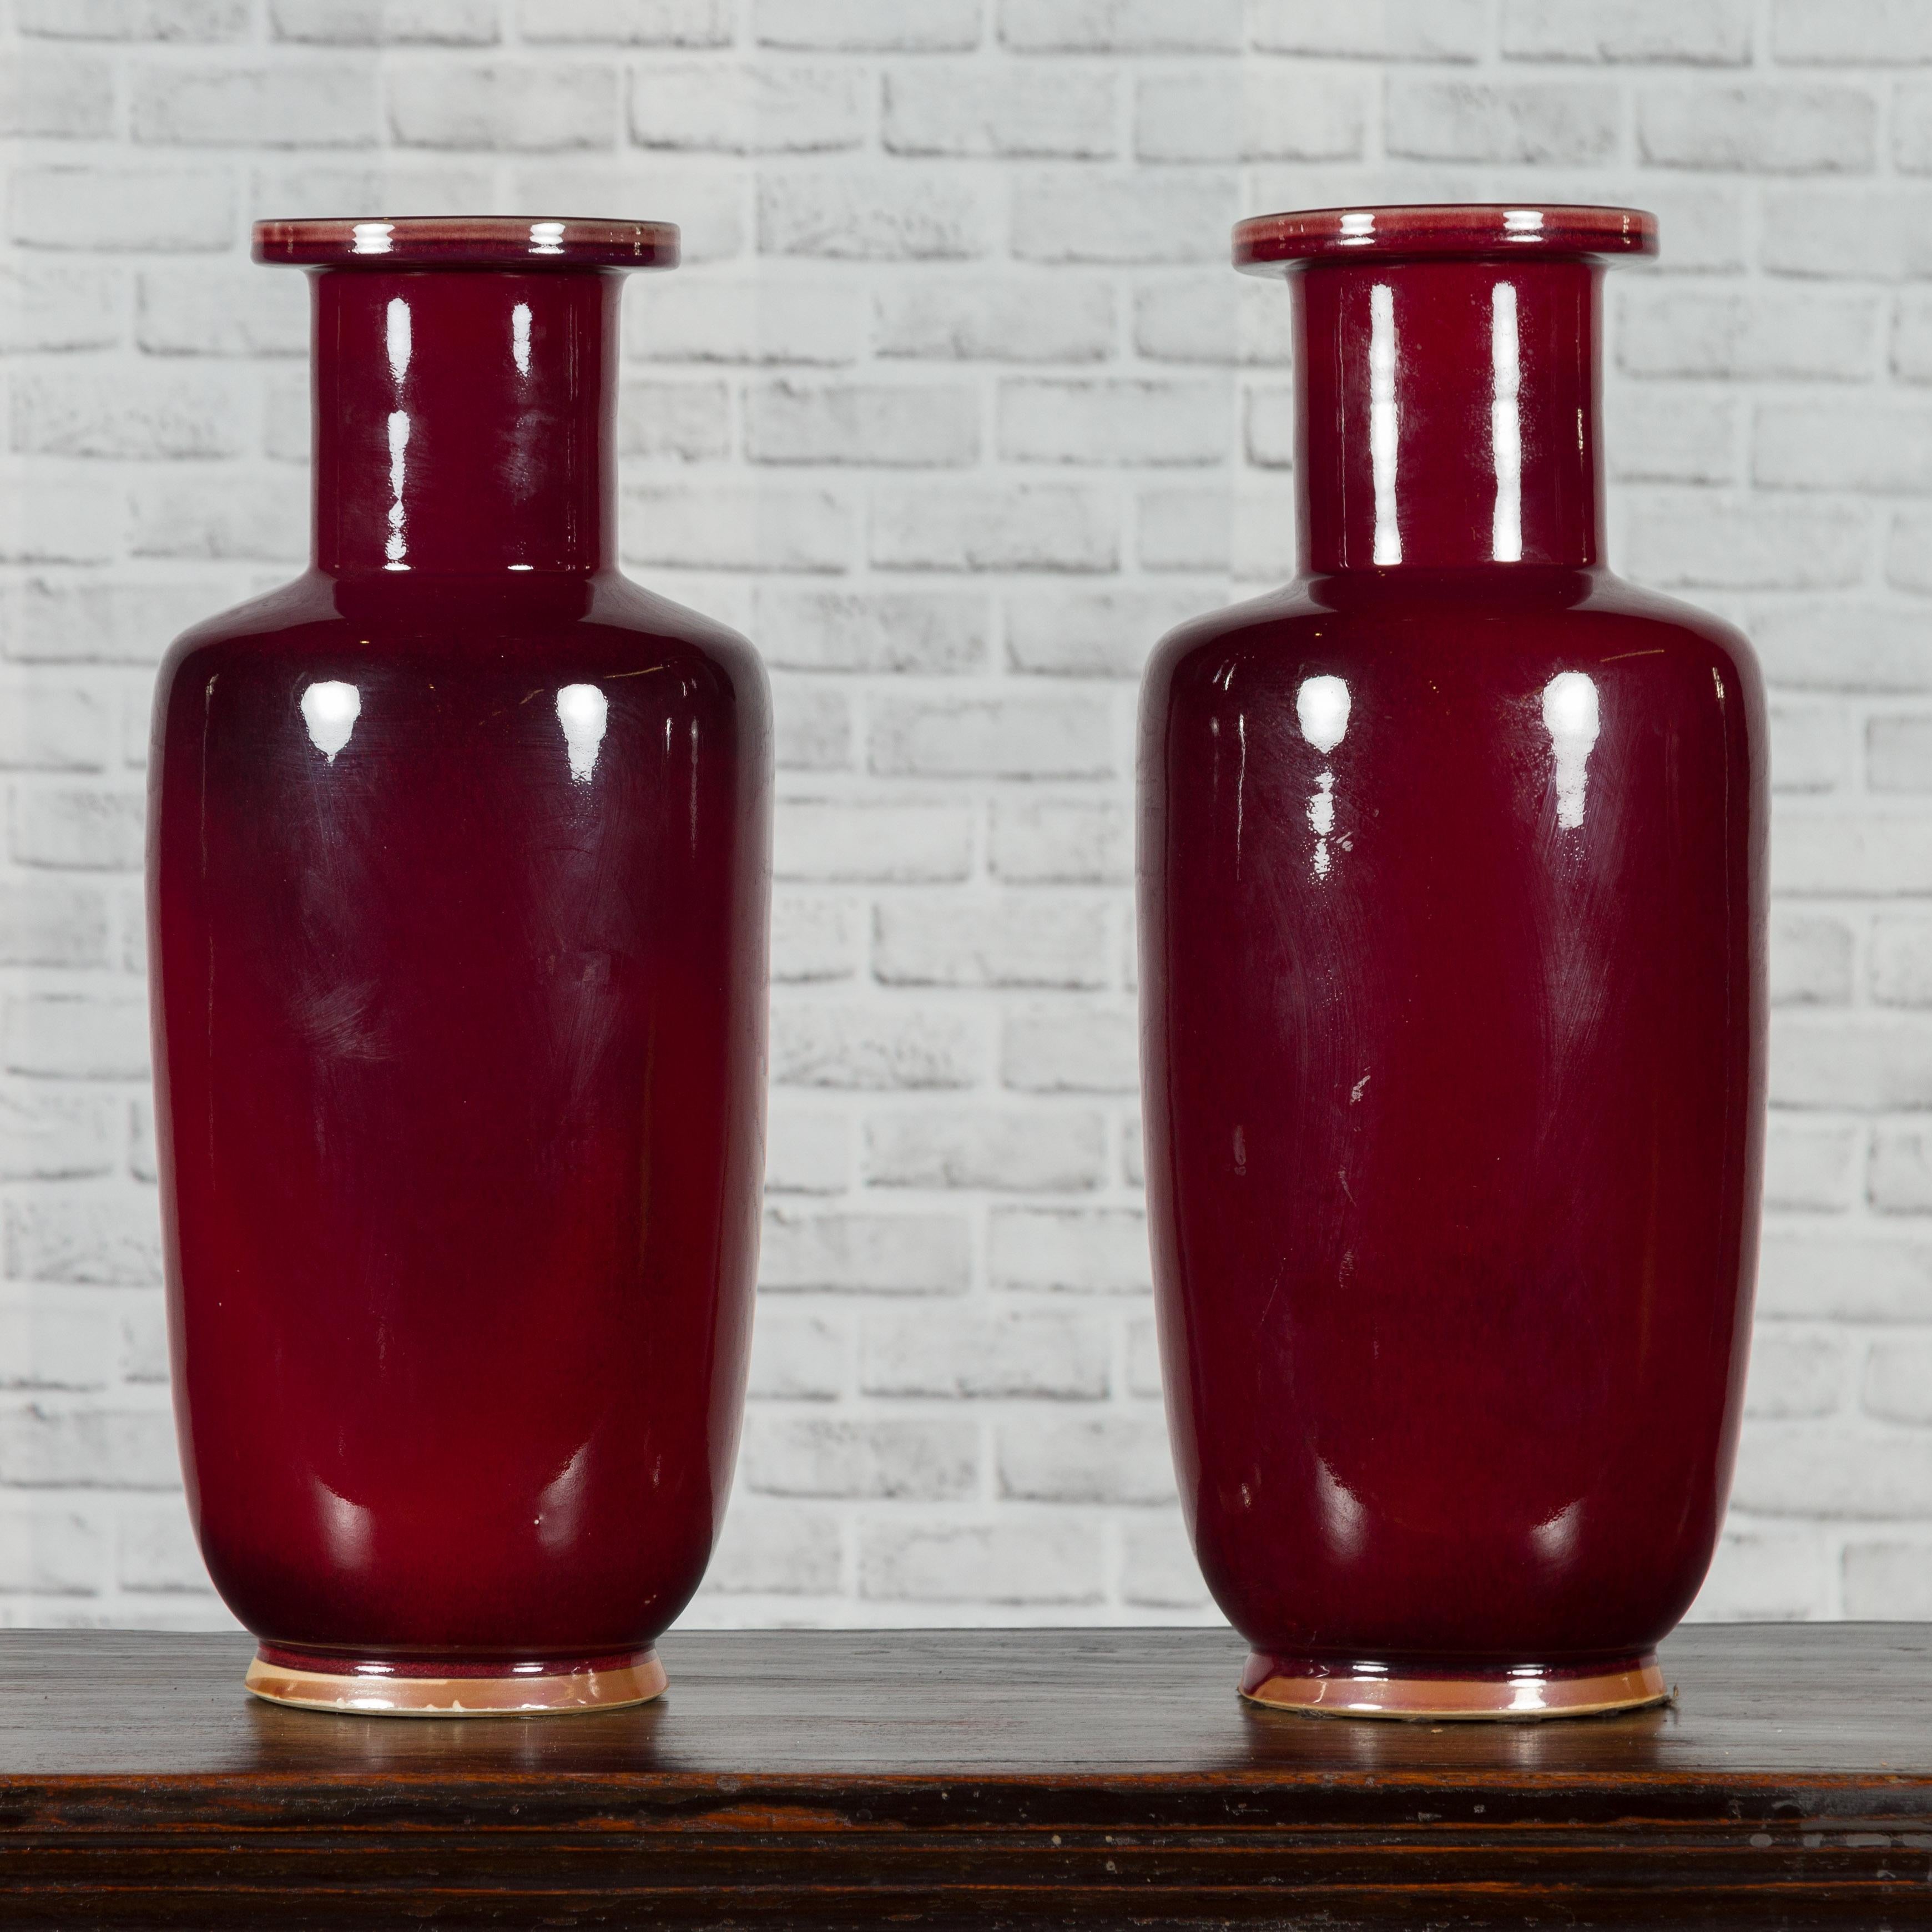 A Chinese contemporary oxblood altar vase with dark patina and tall neck. We currently have two available, priced and sold individually $590 each. Created in China during the 21st century, each of these altar vases attracts our attention with its